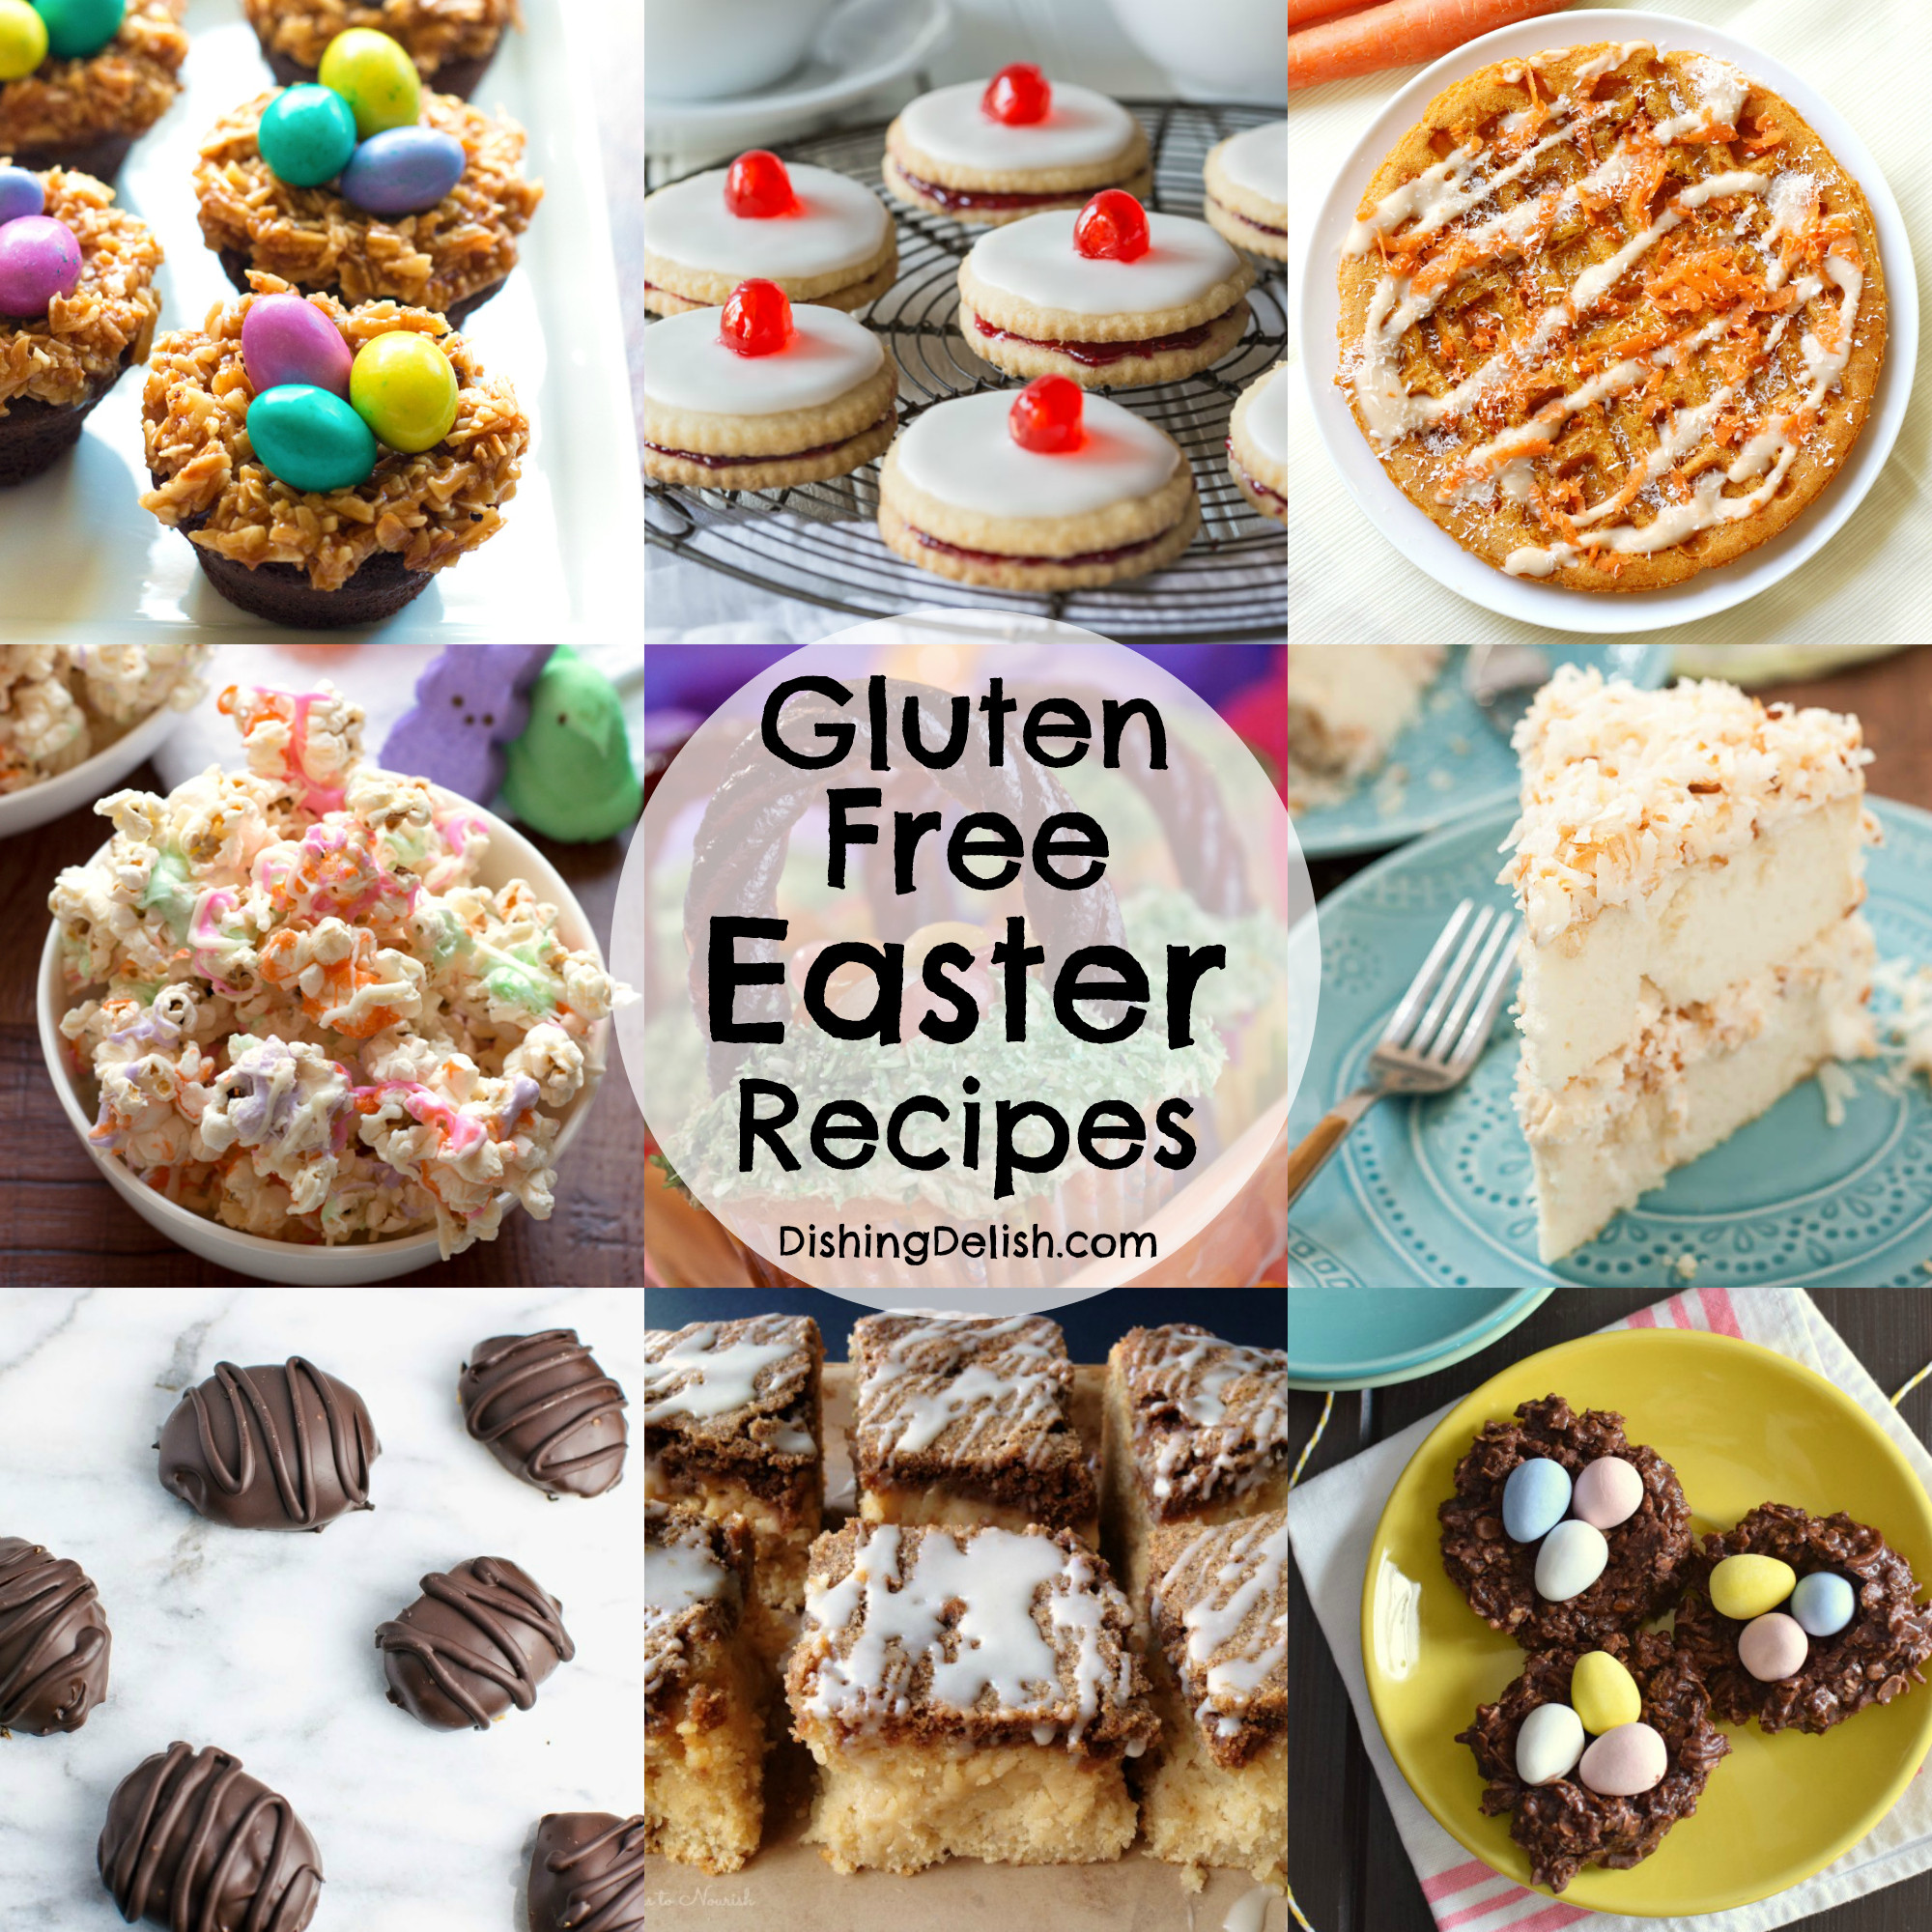 Gluten Free Easter Recipes Unique 13 Gluten Free Easter Recipes • Dishing Delish